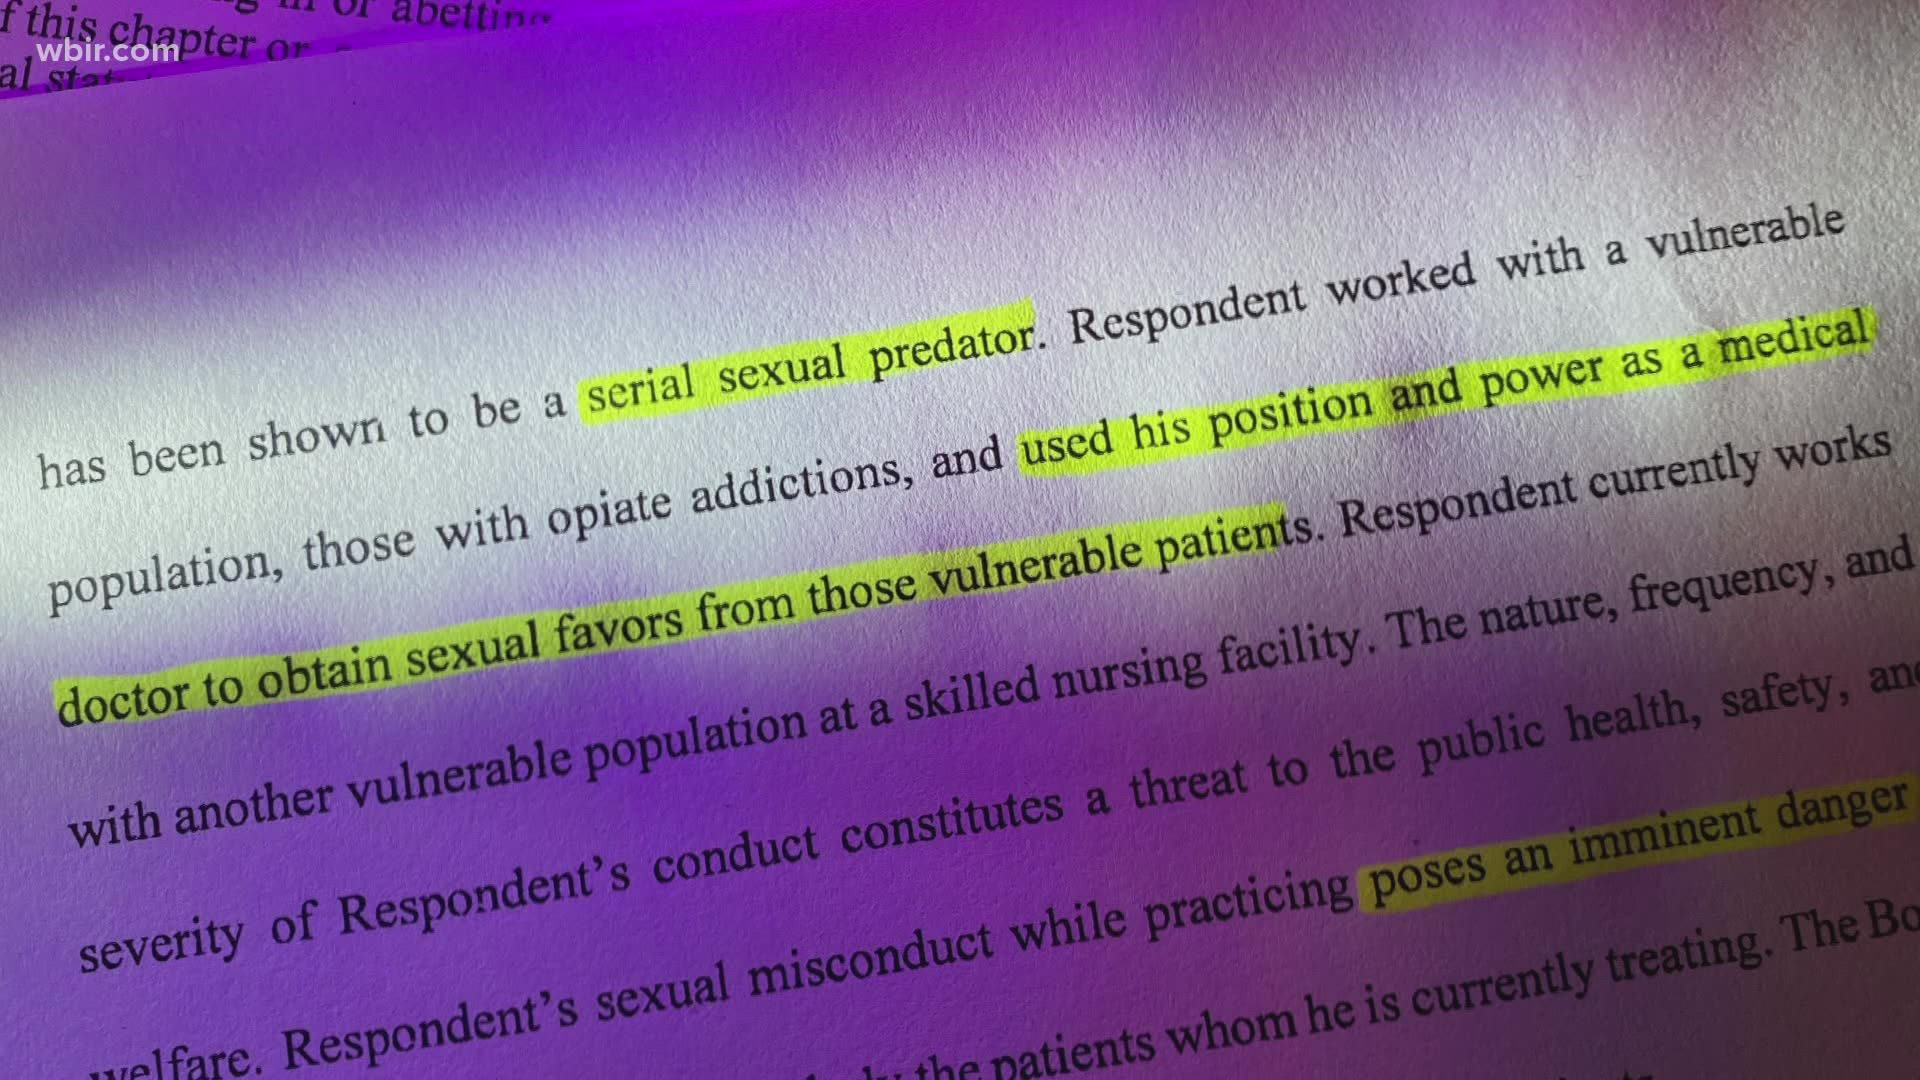 A state board last week suspended the medical license of an East Tennessee physician it calls a "serial sexual predator" for his conduct with several women patients.